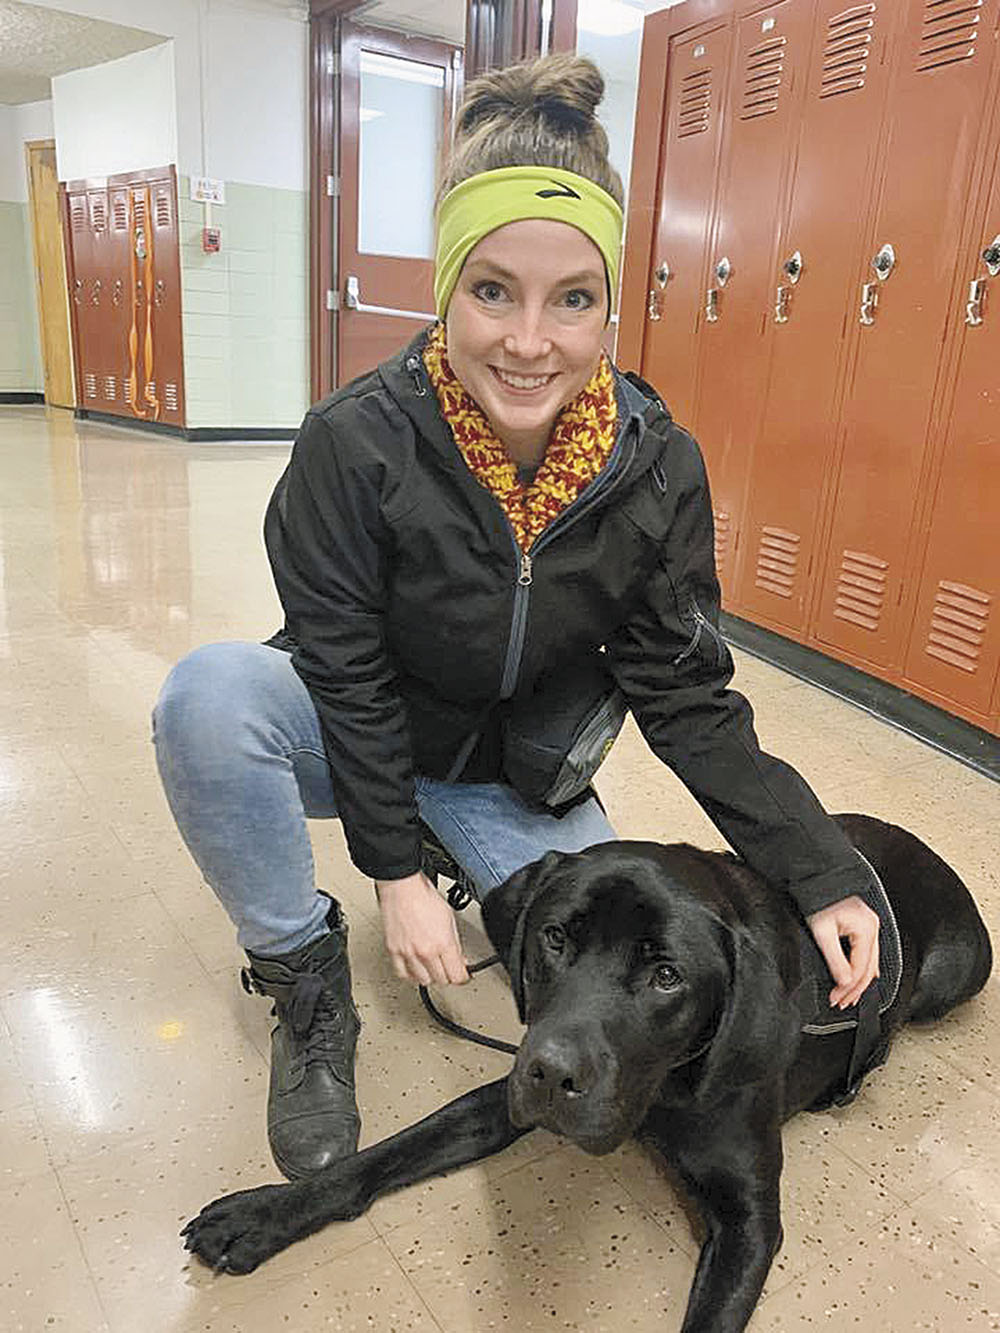 Everybody Loves Raymond: Service dog learns along with students at CCHS